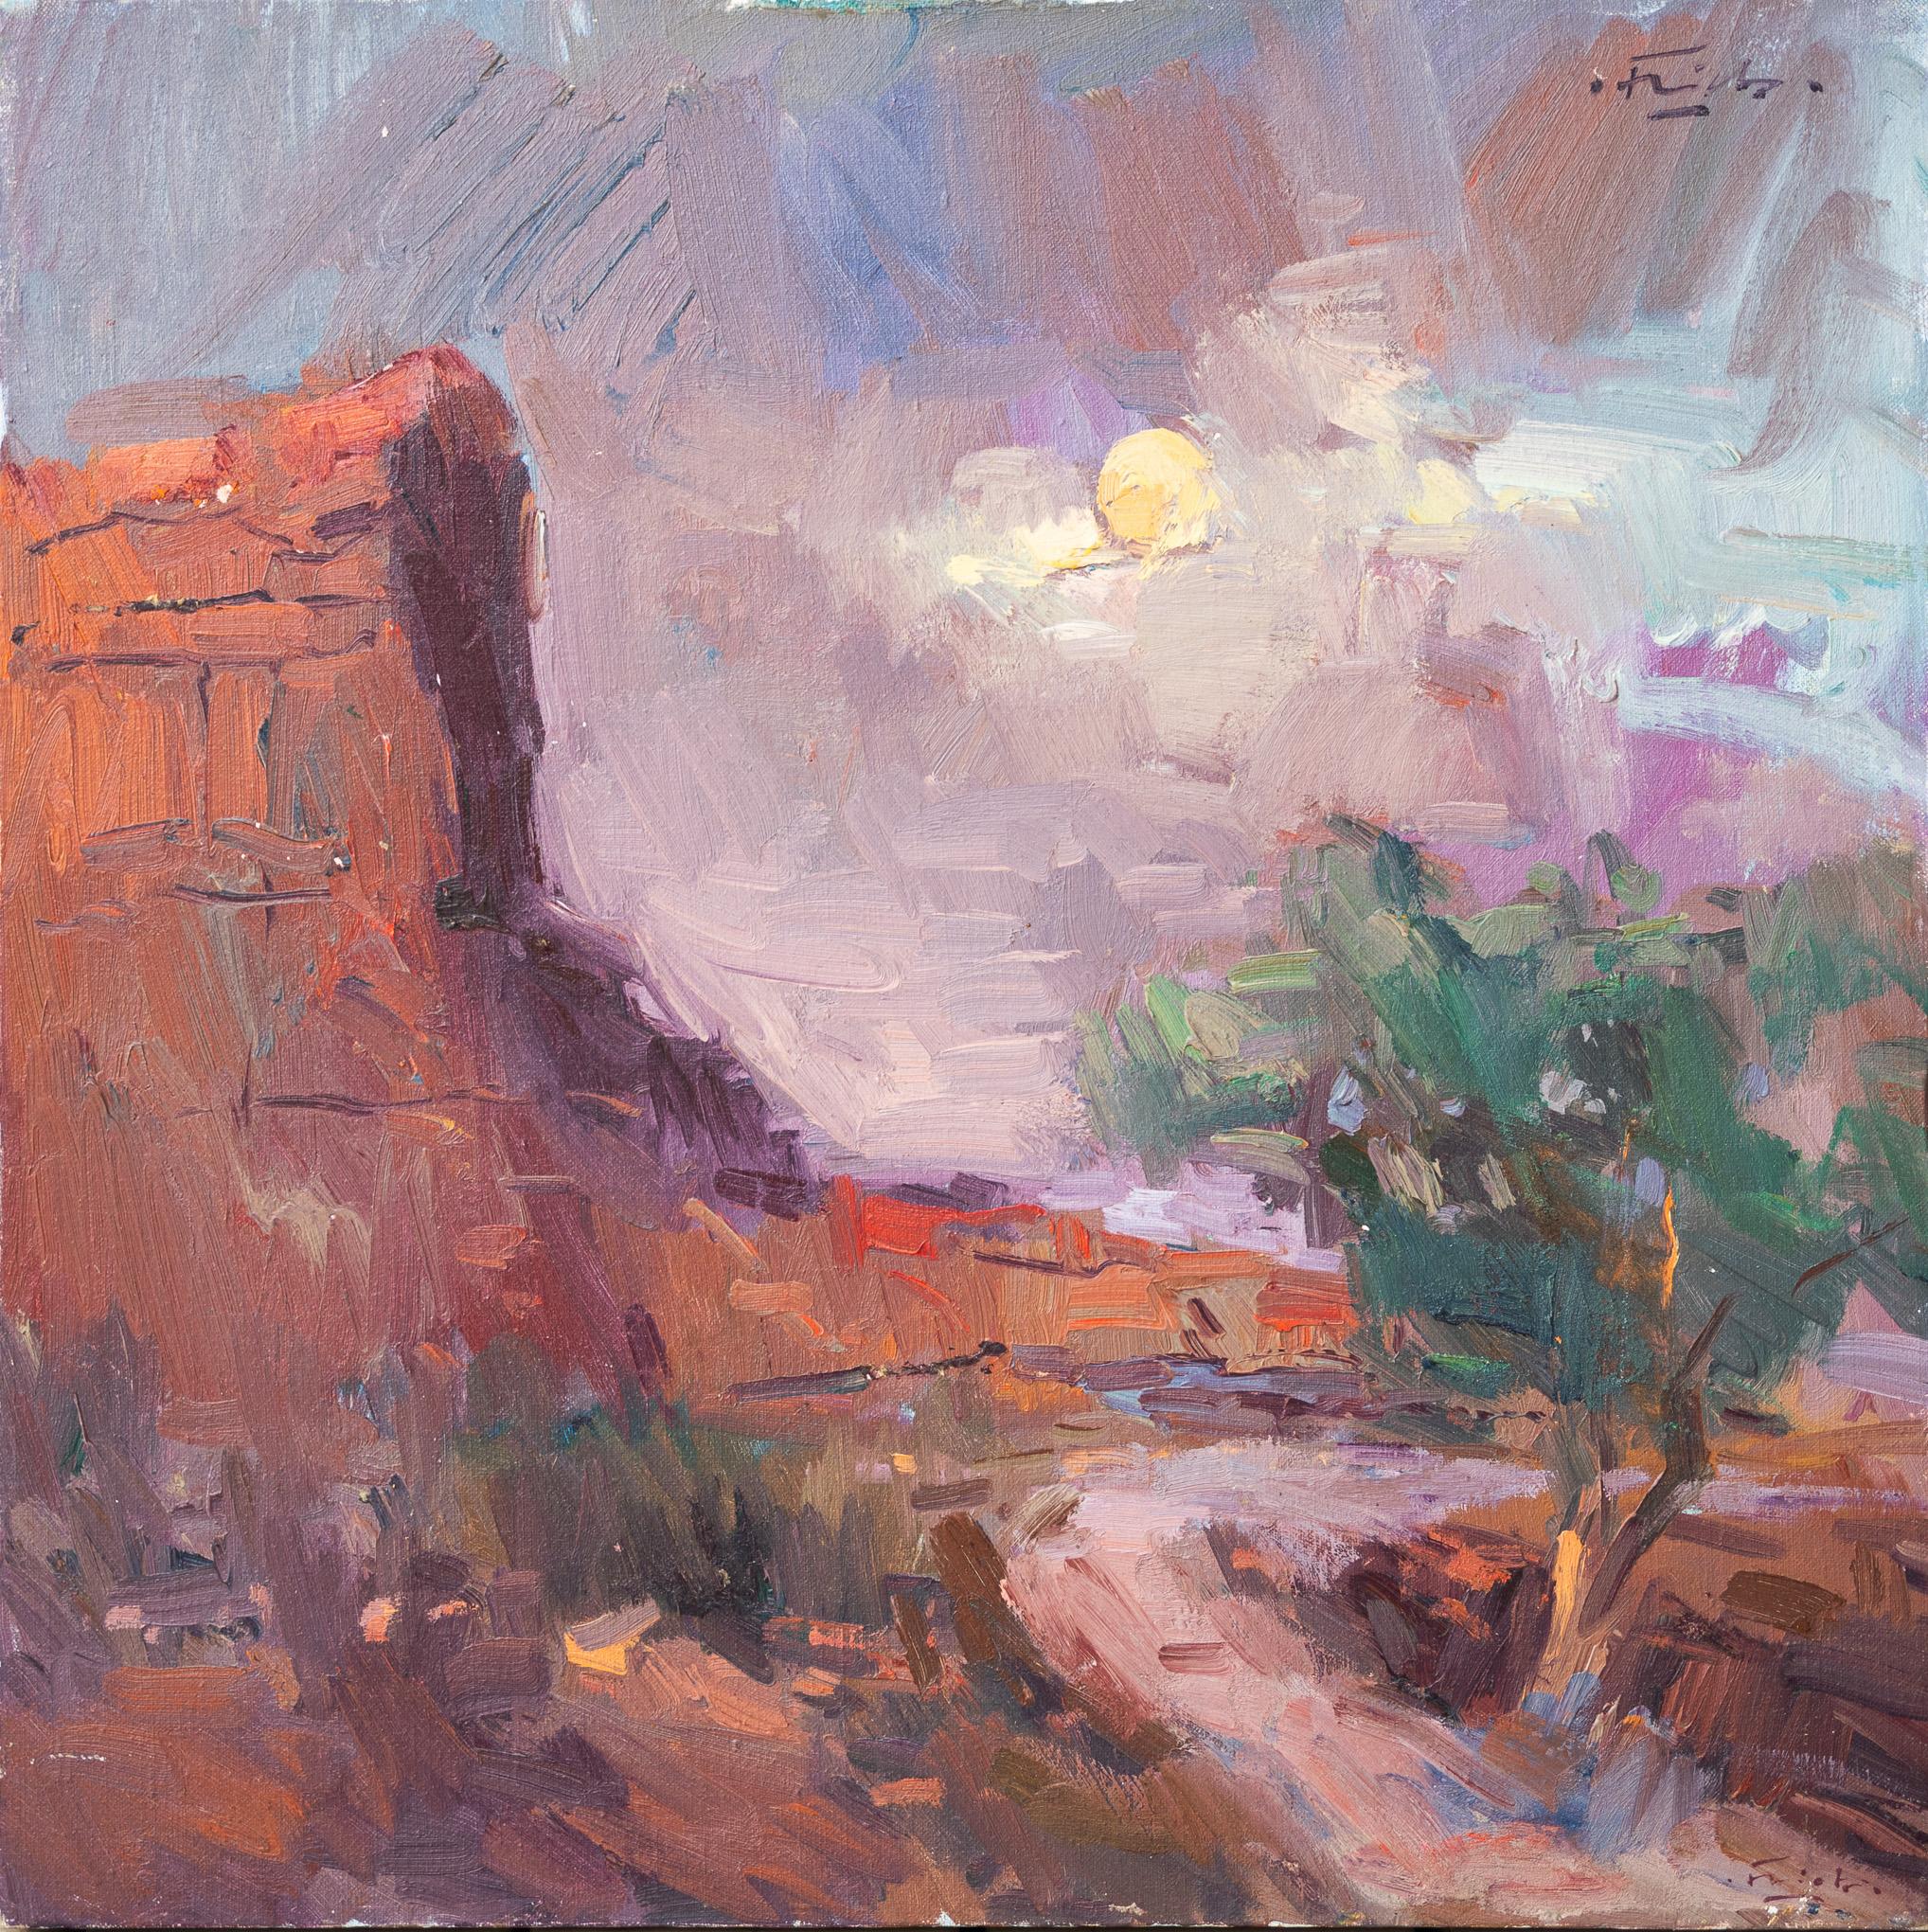 Guido Frick Landscape Painting - "Moon Over Monument Valley"